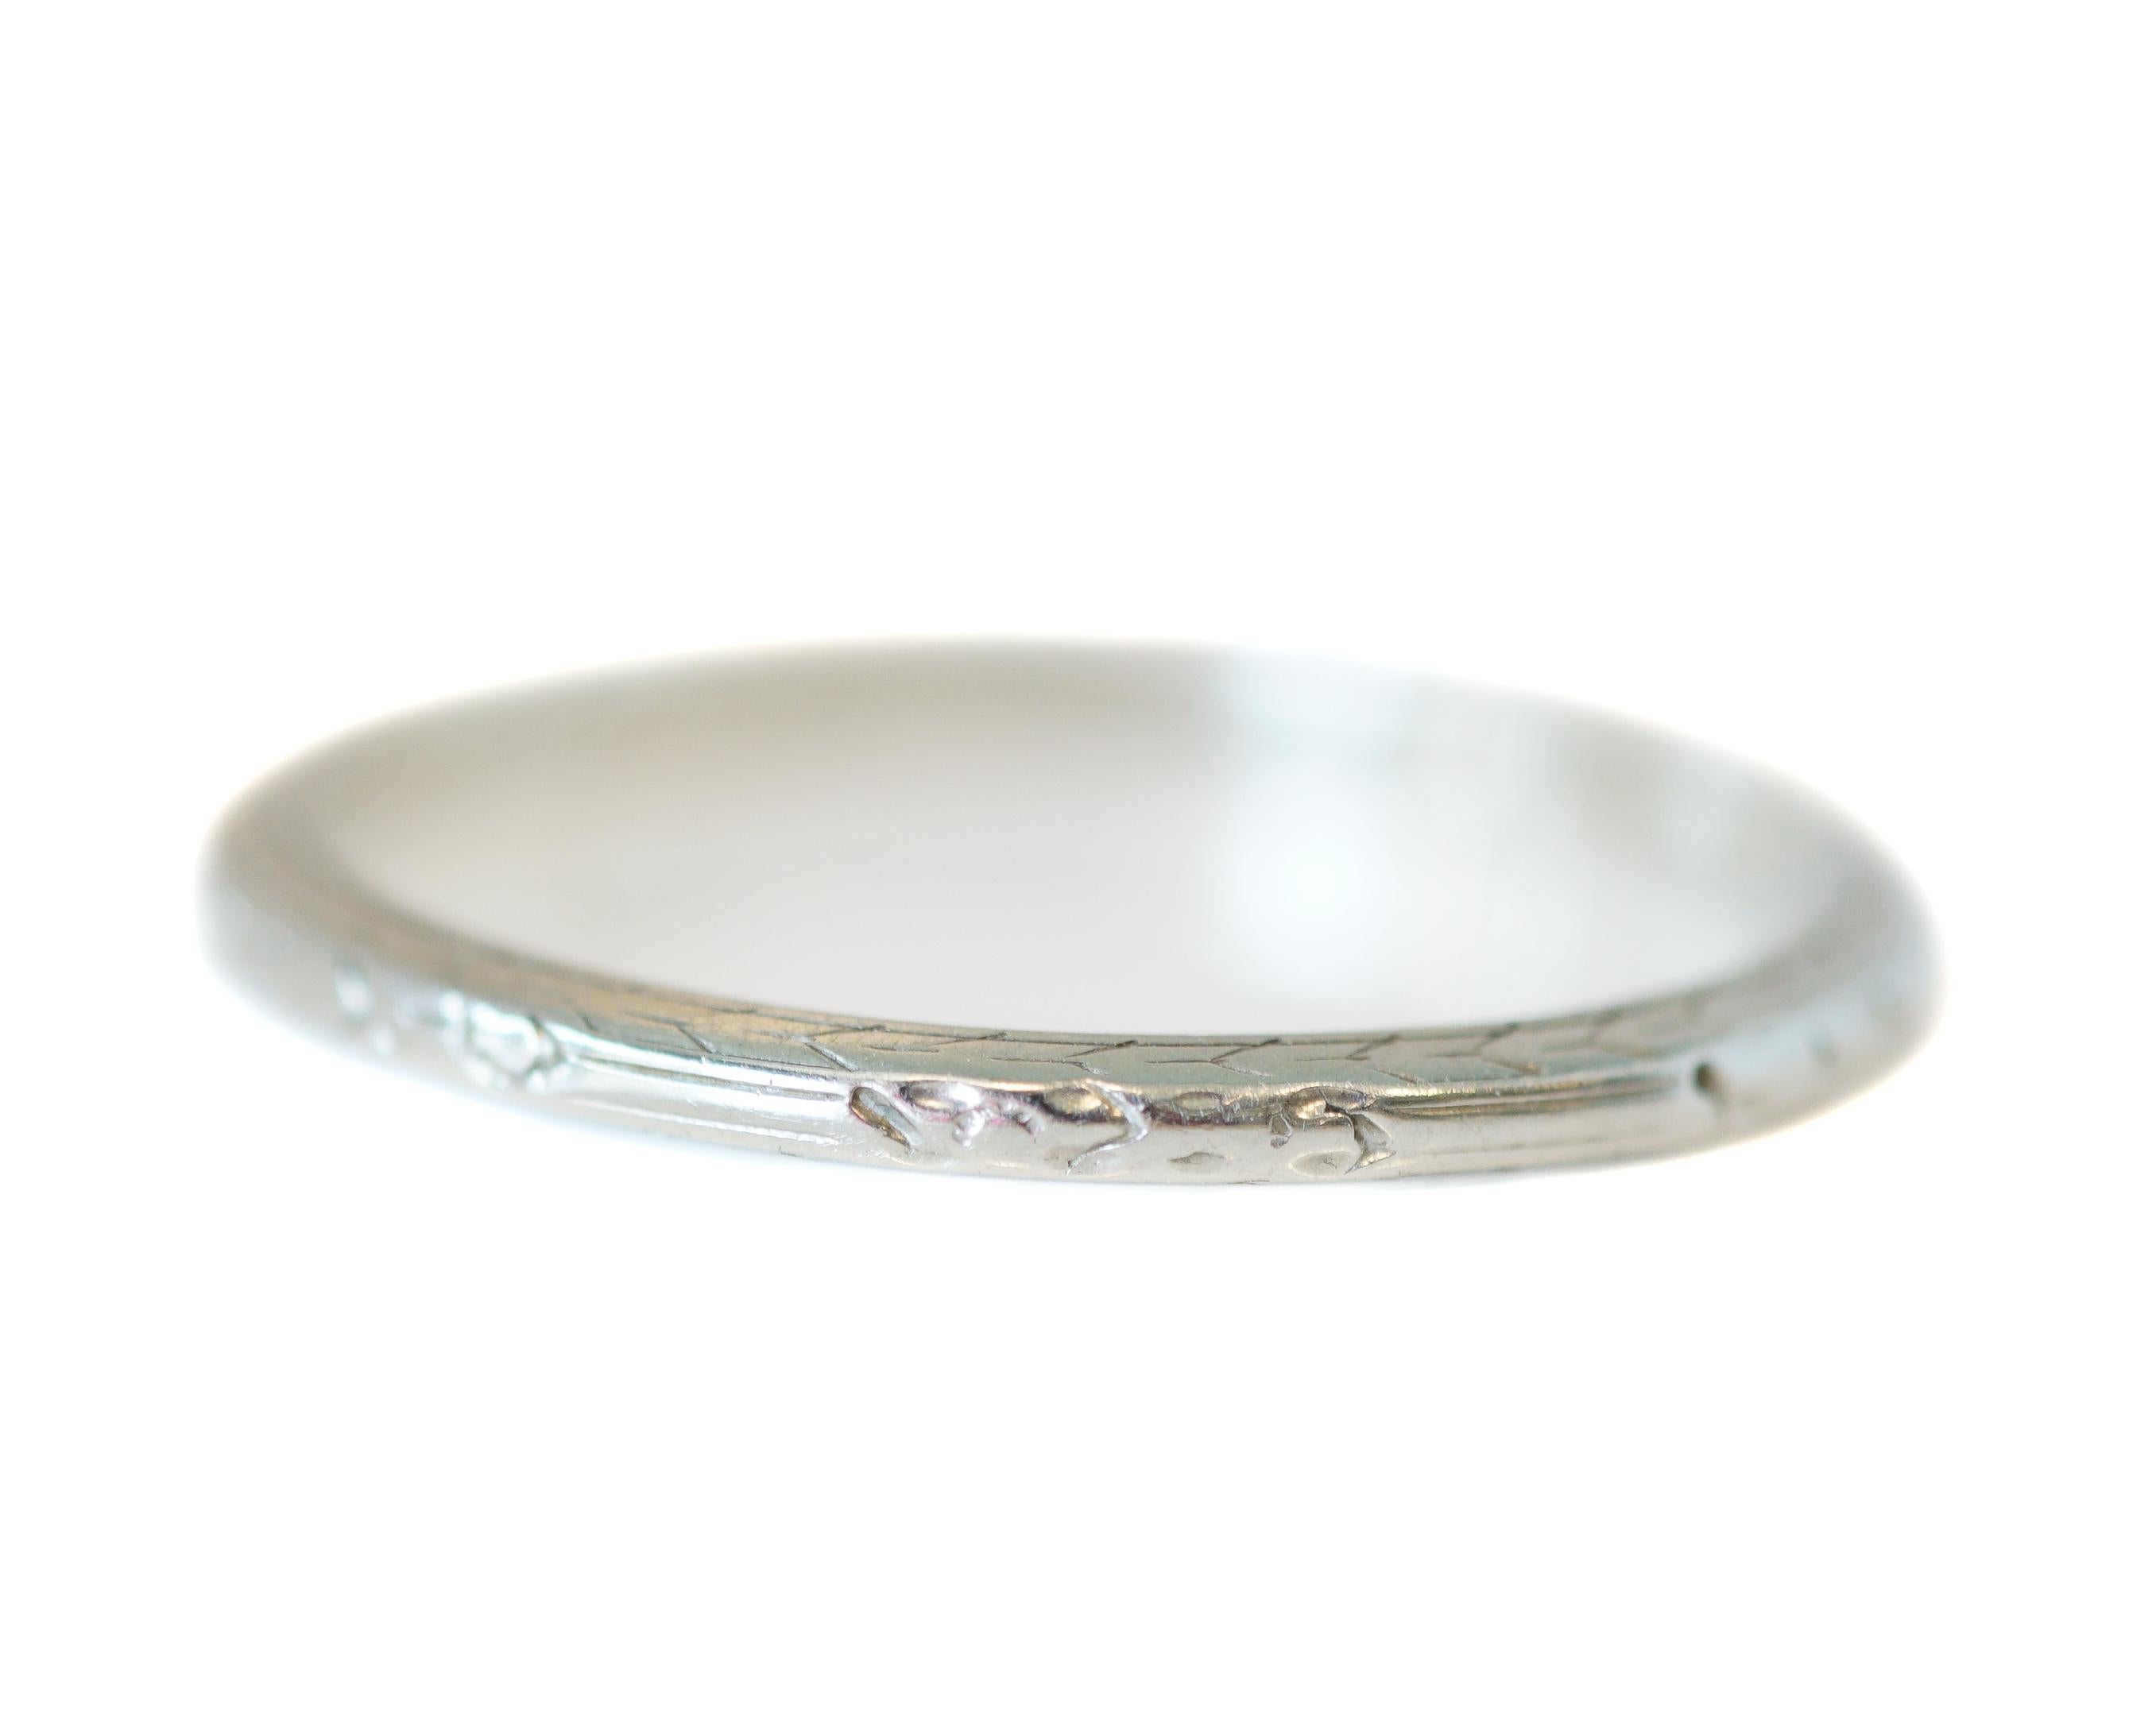 Circa 1926 Belais 18K White Gold Vintage Art Deco Etched Wedding Band -  #190072678 

Beautiful and dainty wedding band from the 1920's. This band is from the Art Deco era and features a delicate etched pattern around the band. This band is 18k